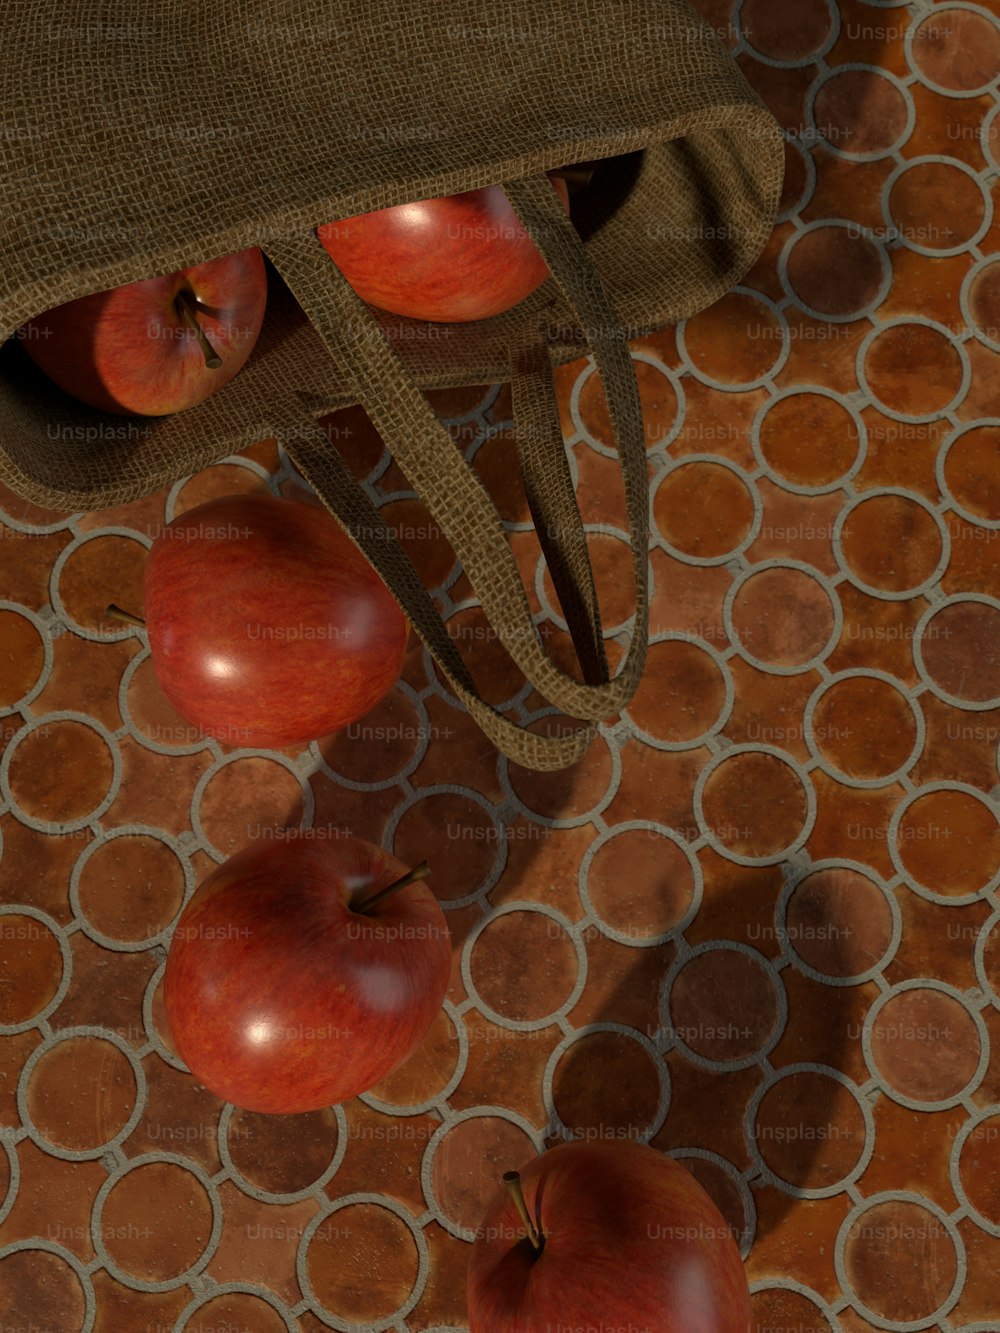 a group of apples sitting on top of a tiled floor